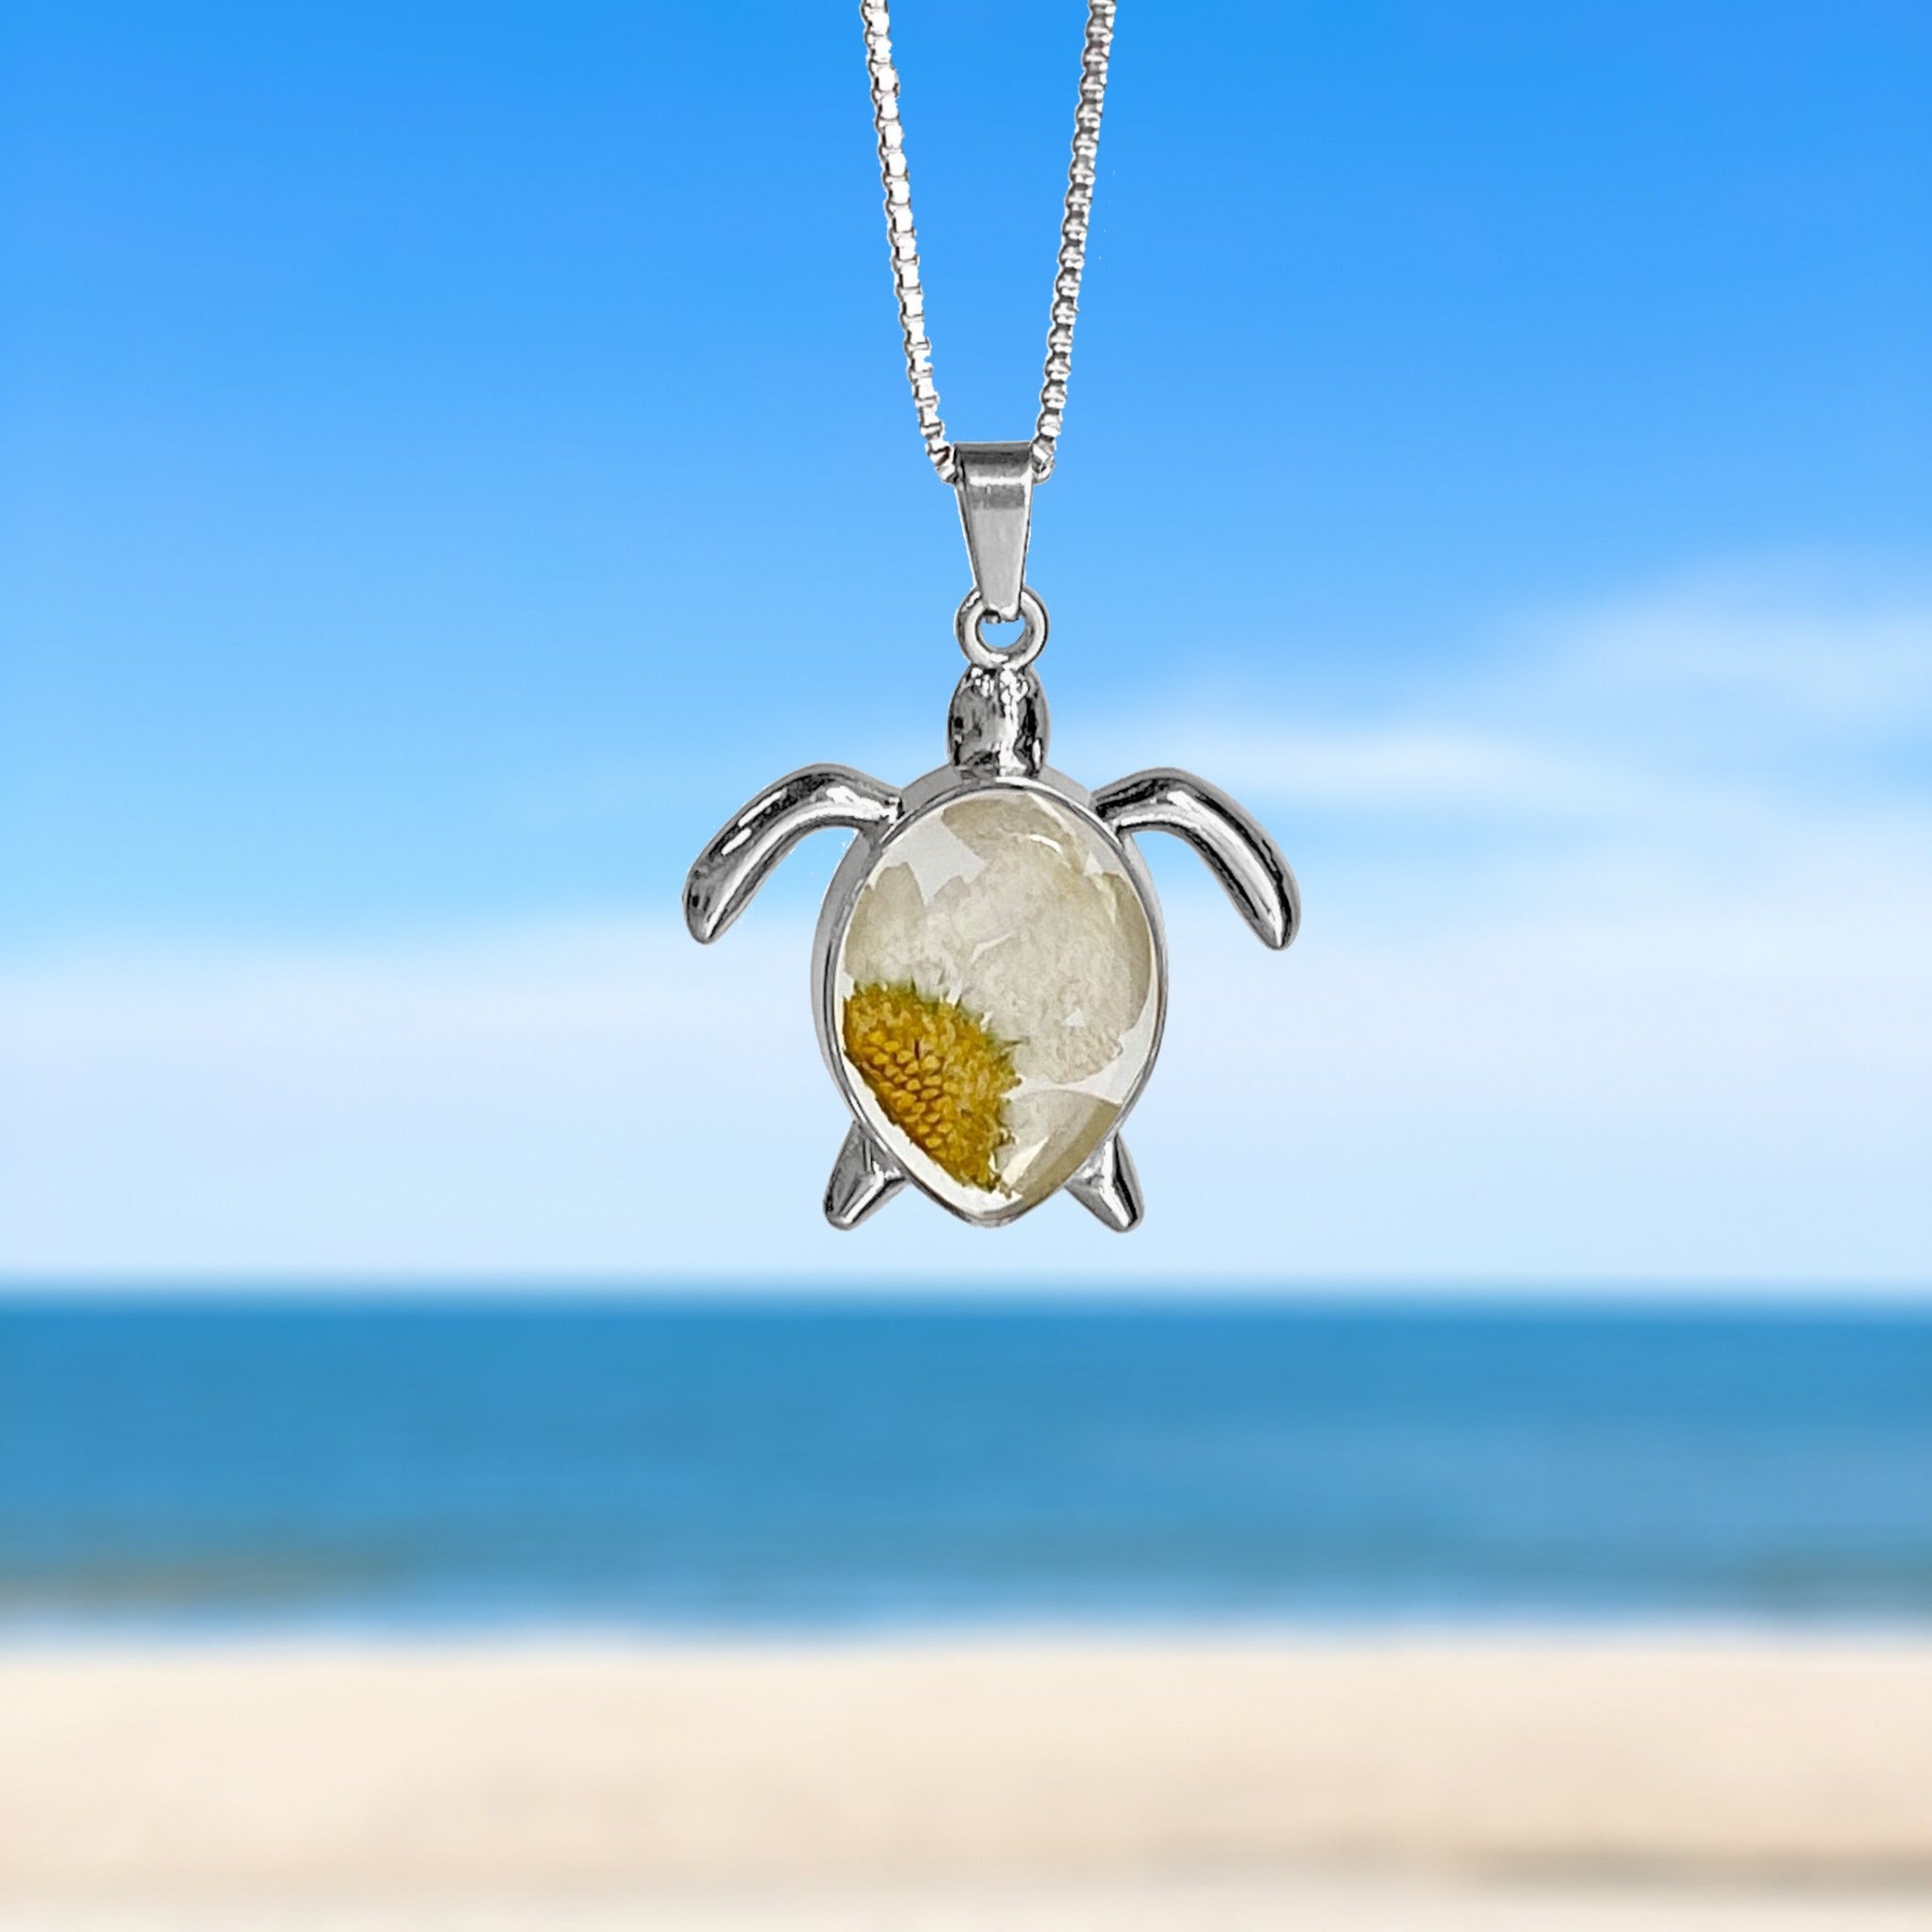 Pressed Daisy Sea Turtle Necklace hanging against a blurred beach background, perfect for beach-themed accessories.